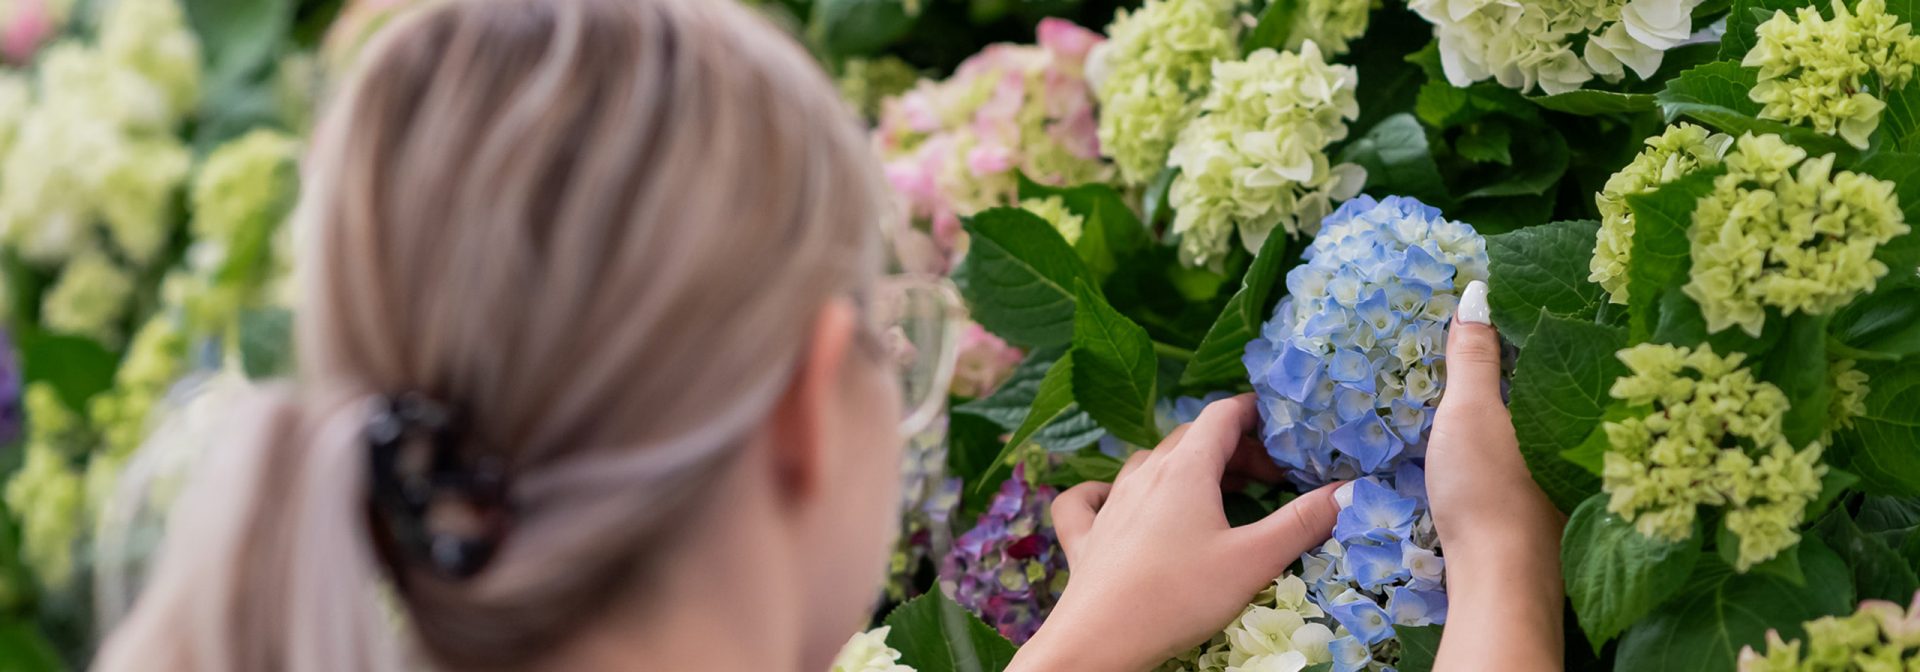 A woman is organizing the flowers